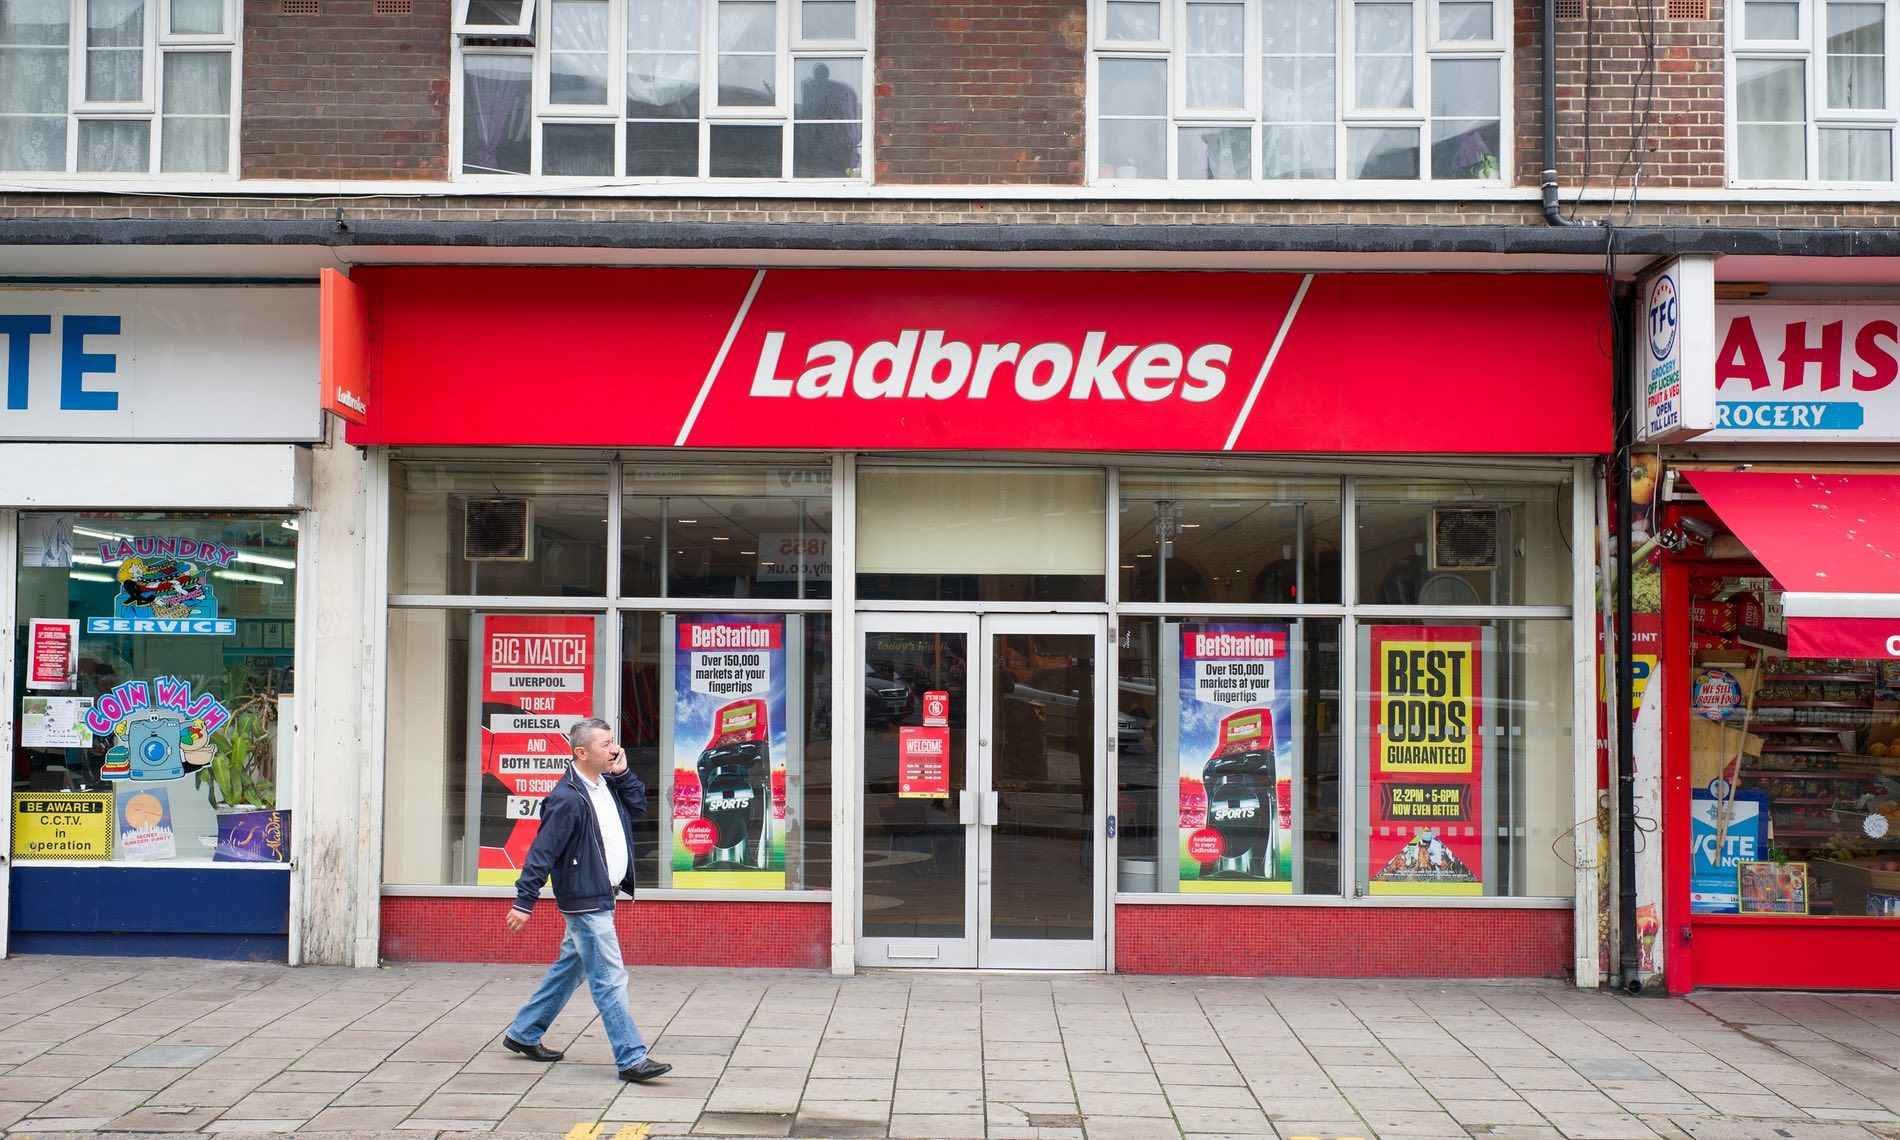 Betting shops on the high street betting short priced favorites lists